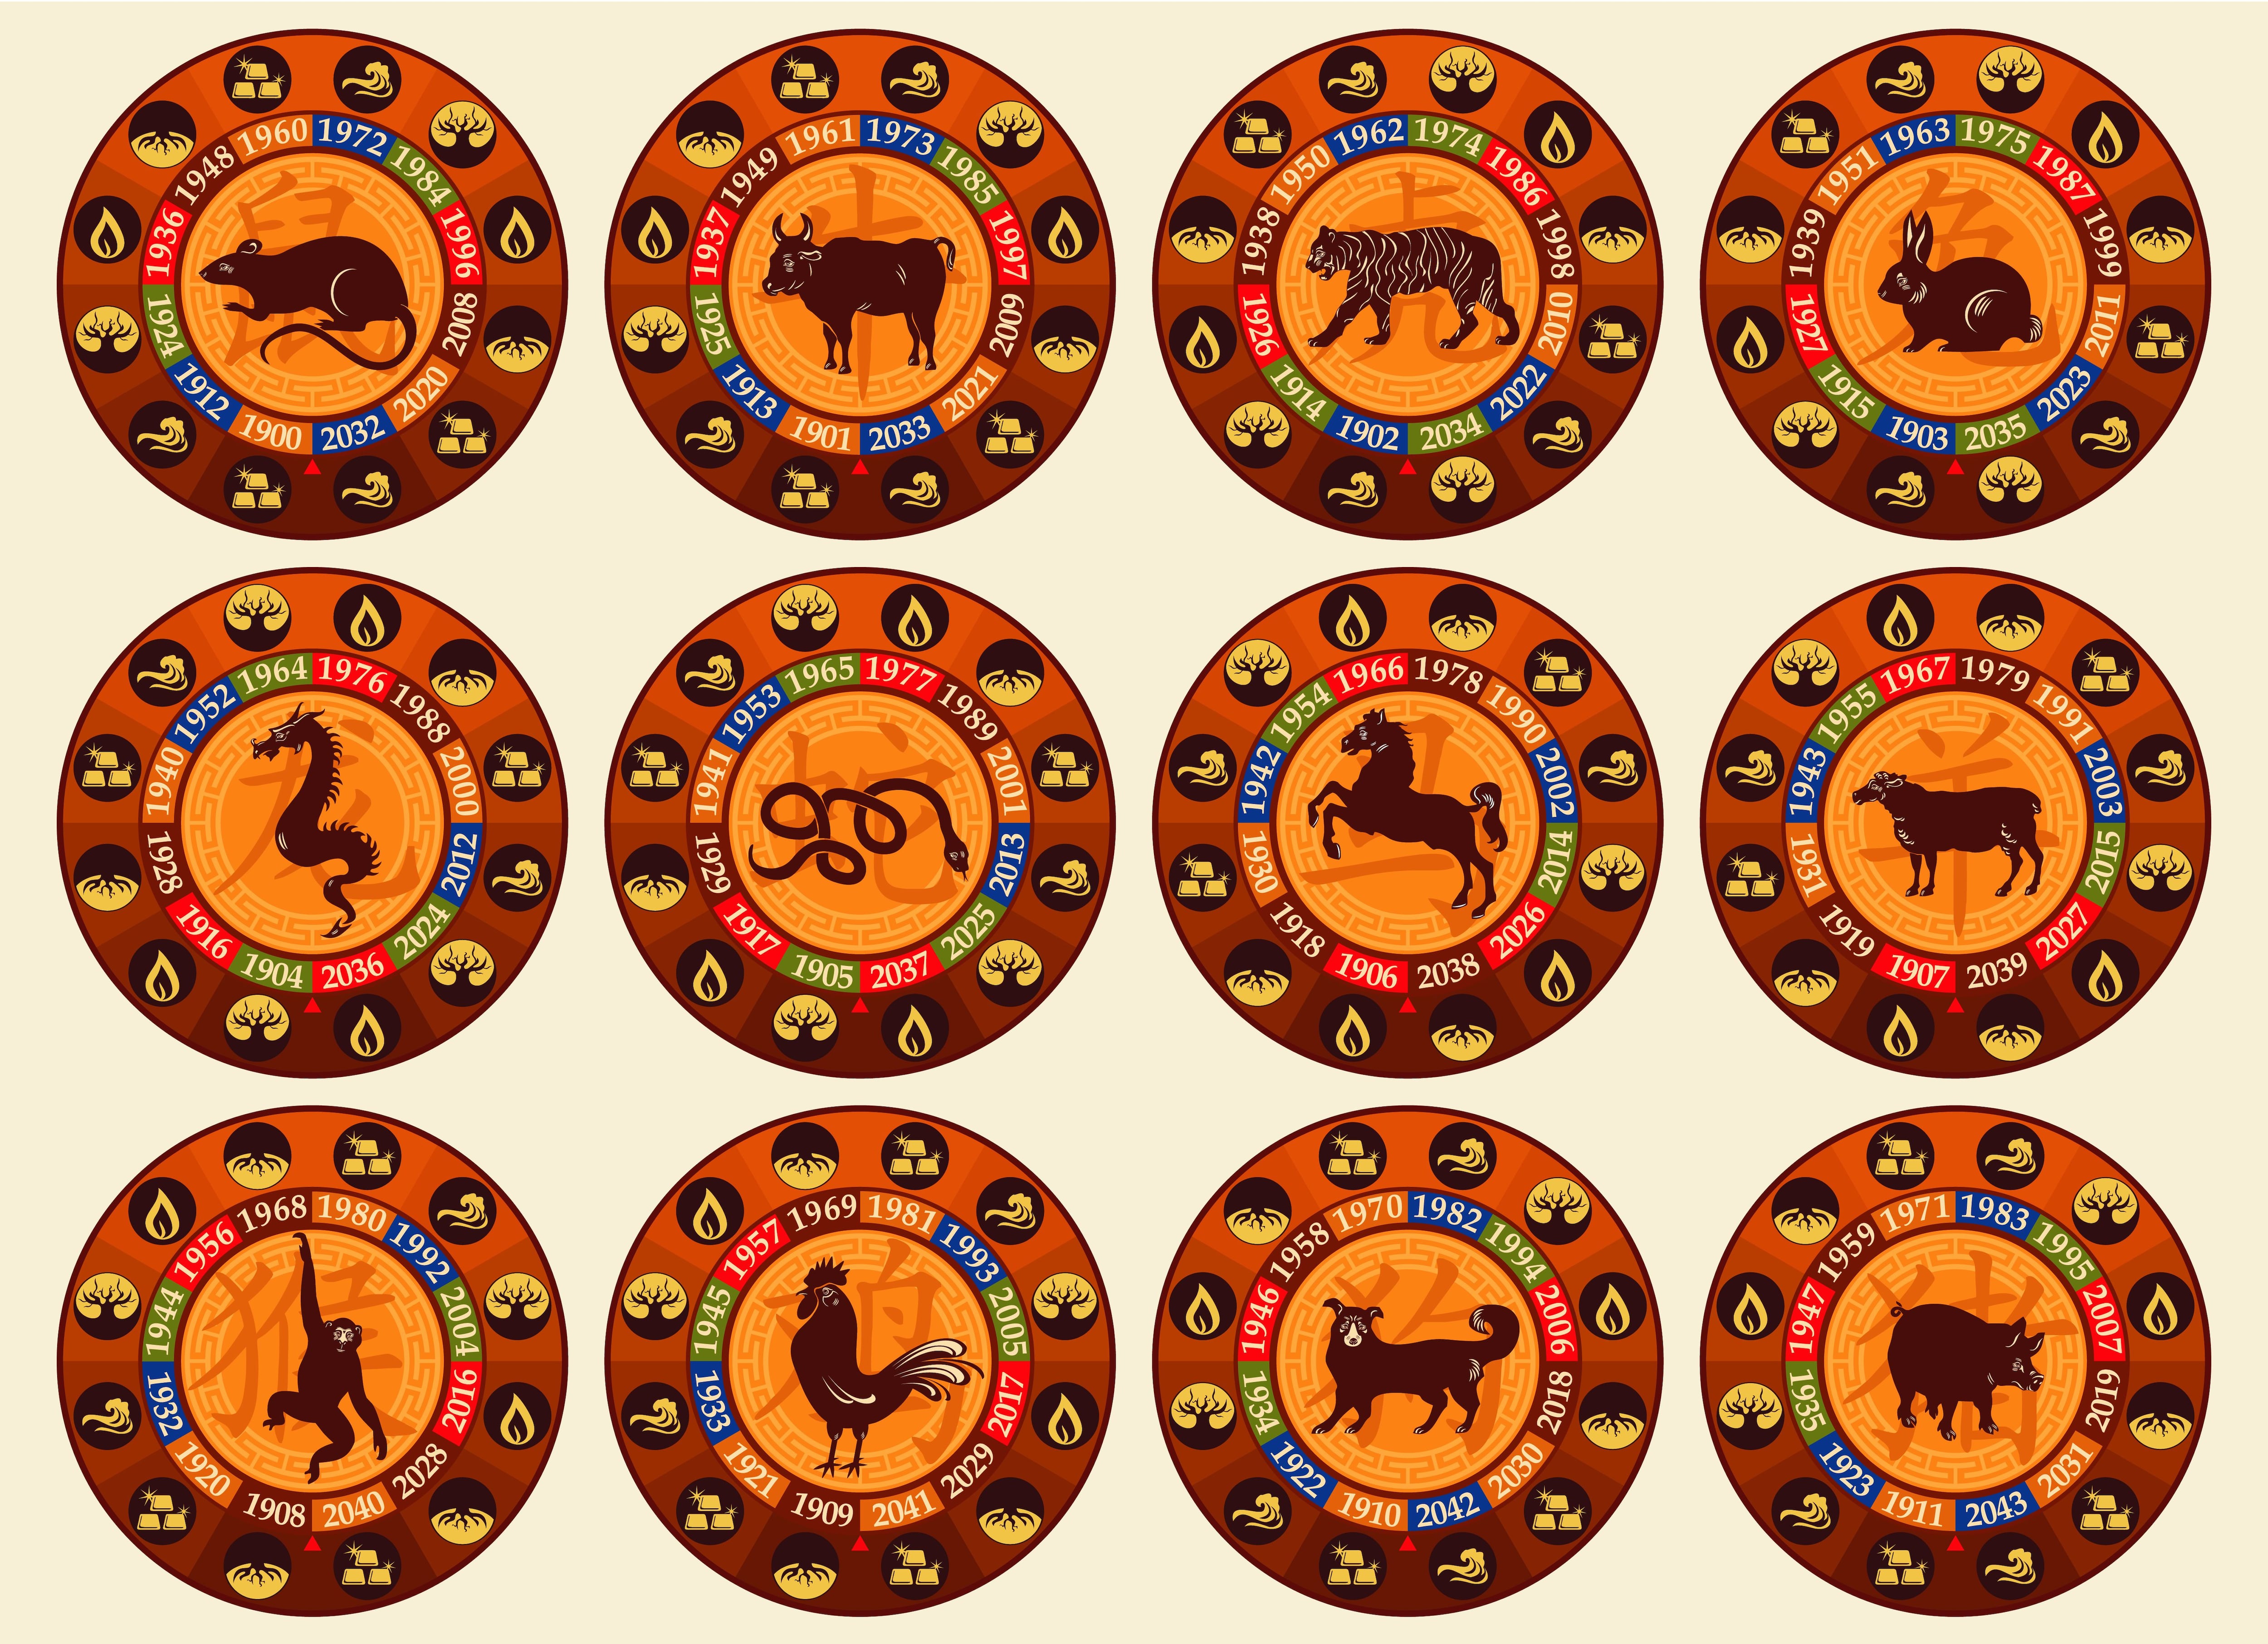 The 12 Chinese Zodiac Signs and Five Elements, and What They Mean